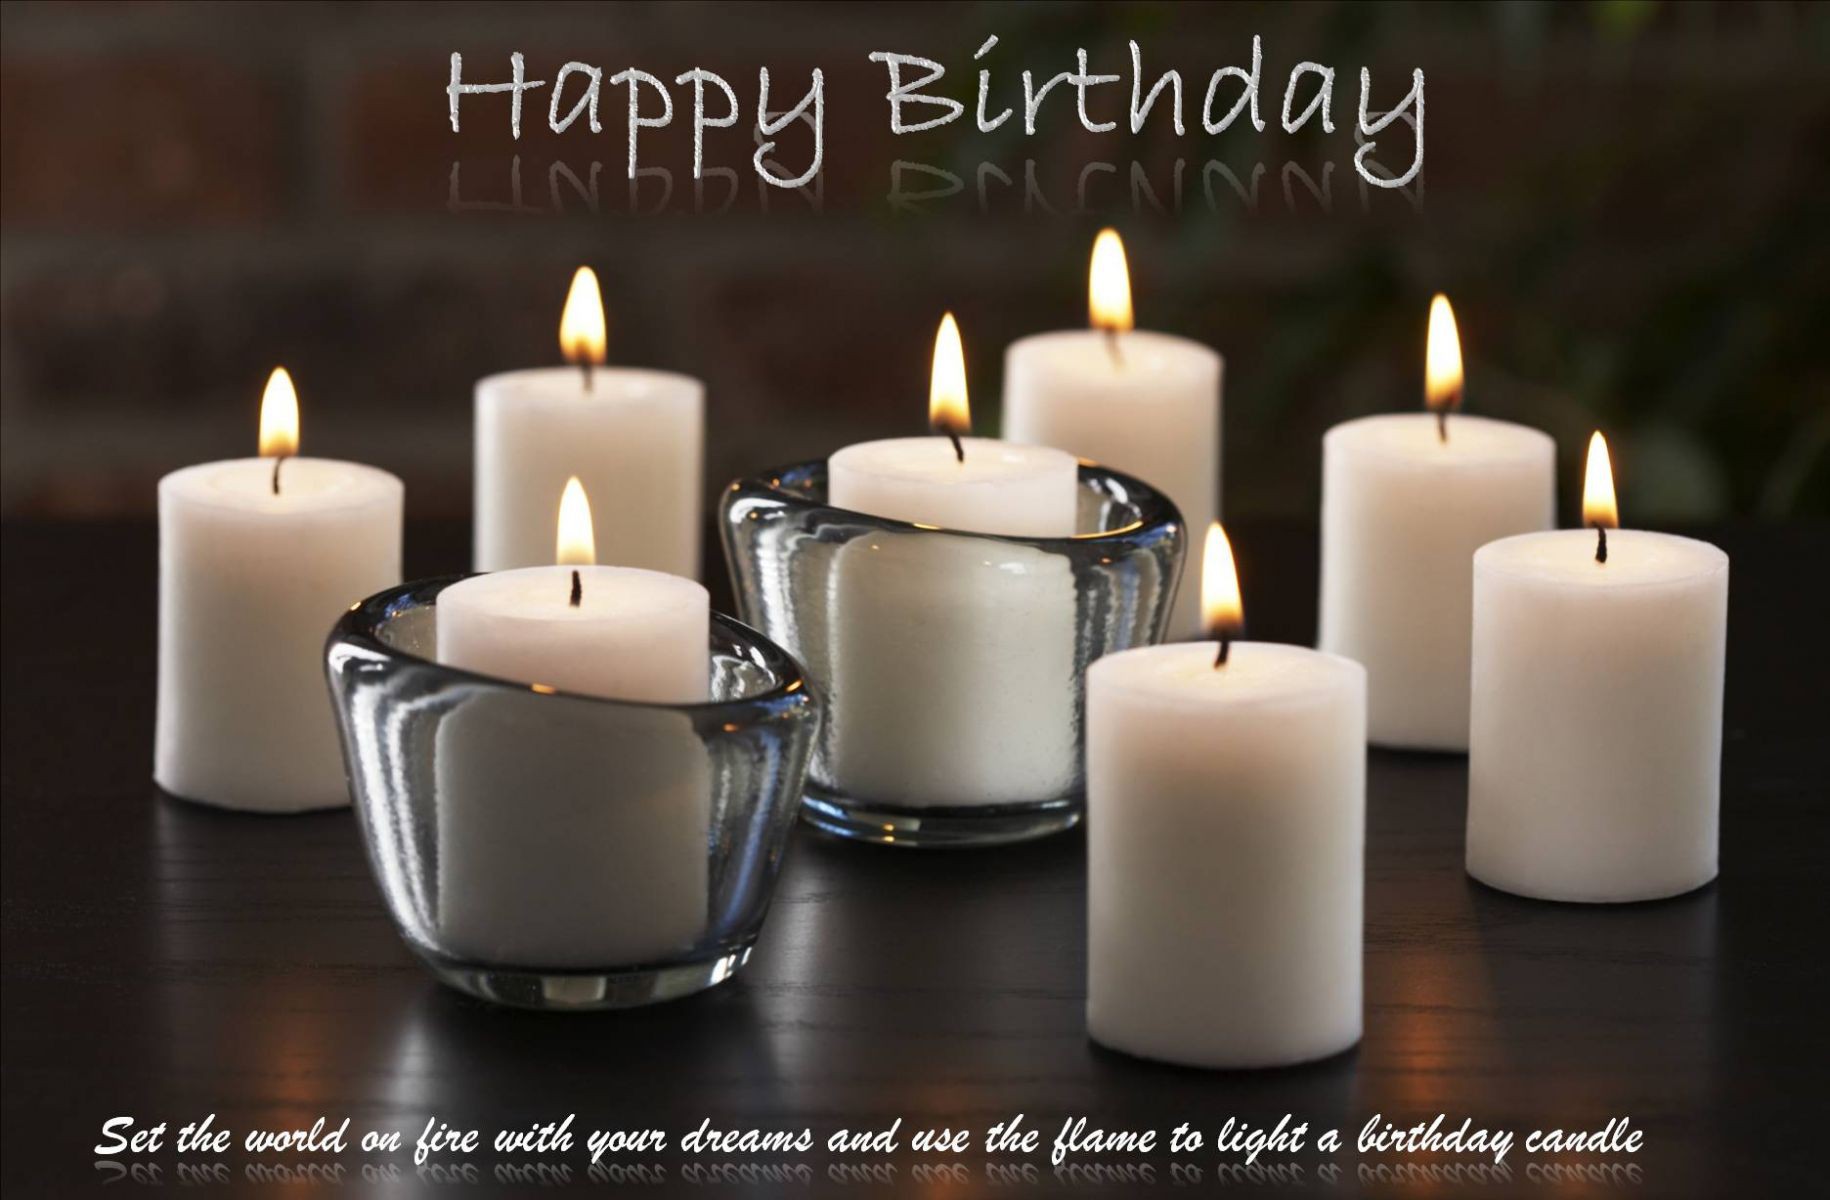 Happy Birthday Quote To Friend Free Awesome Image For Mobile